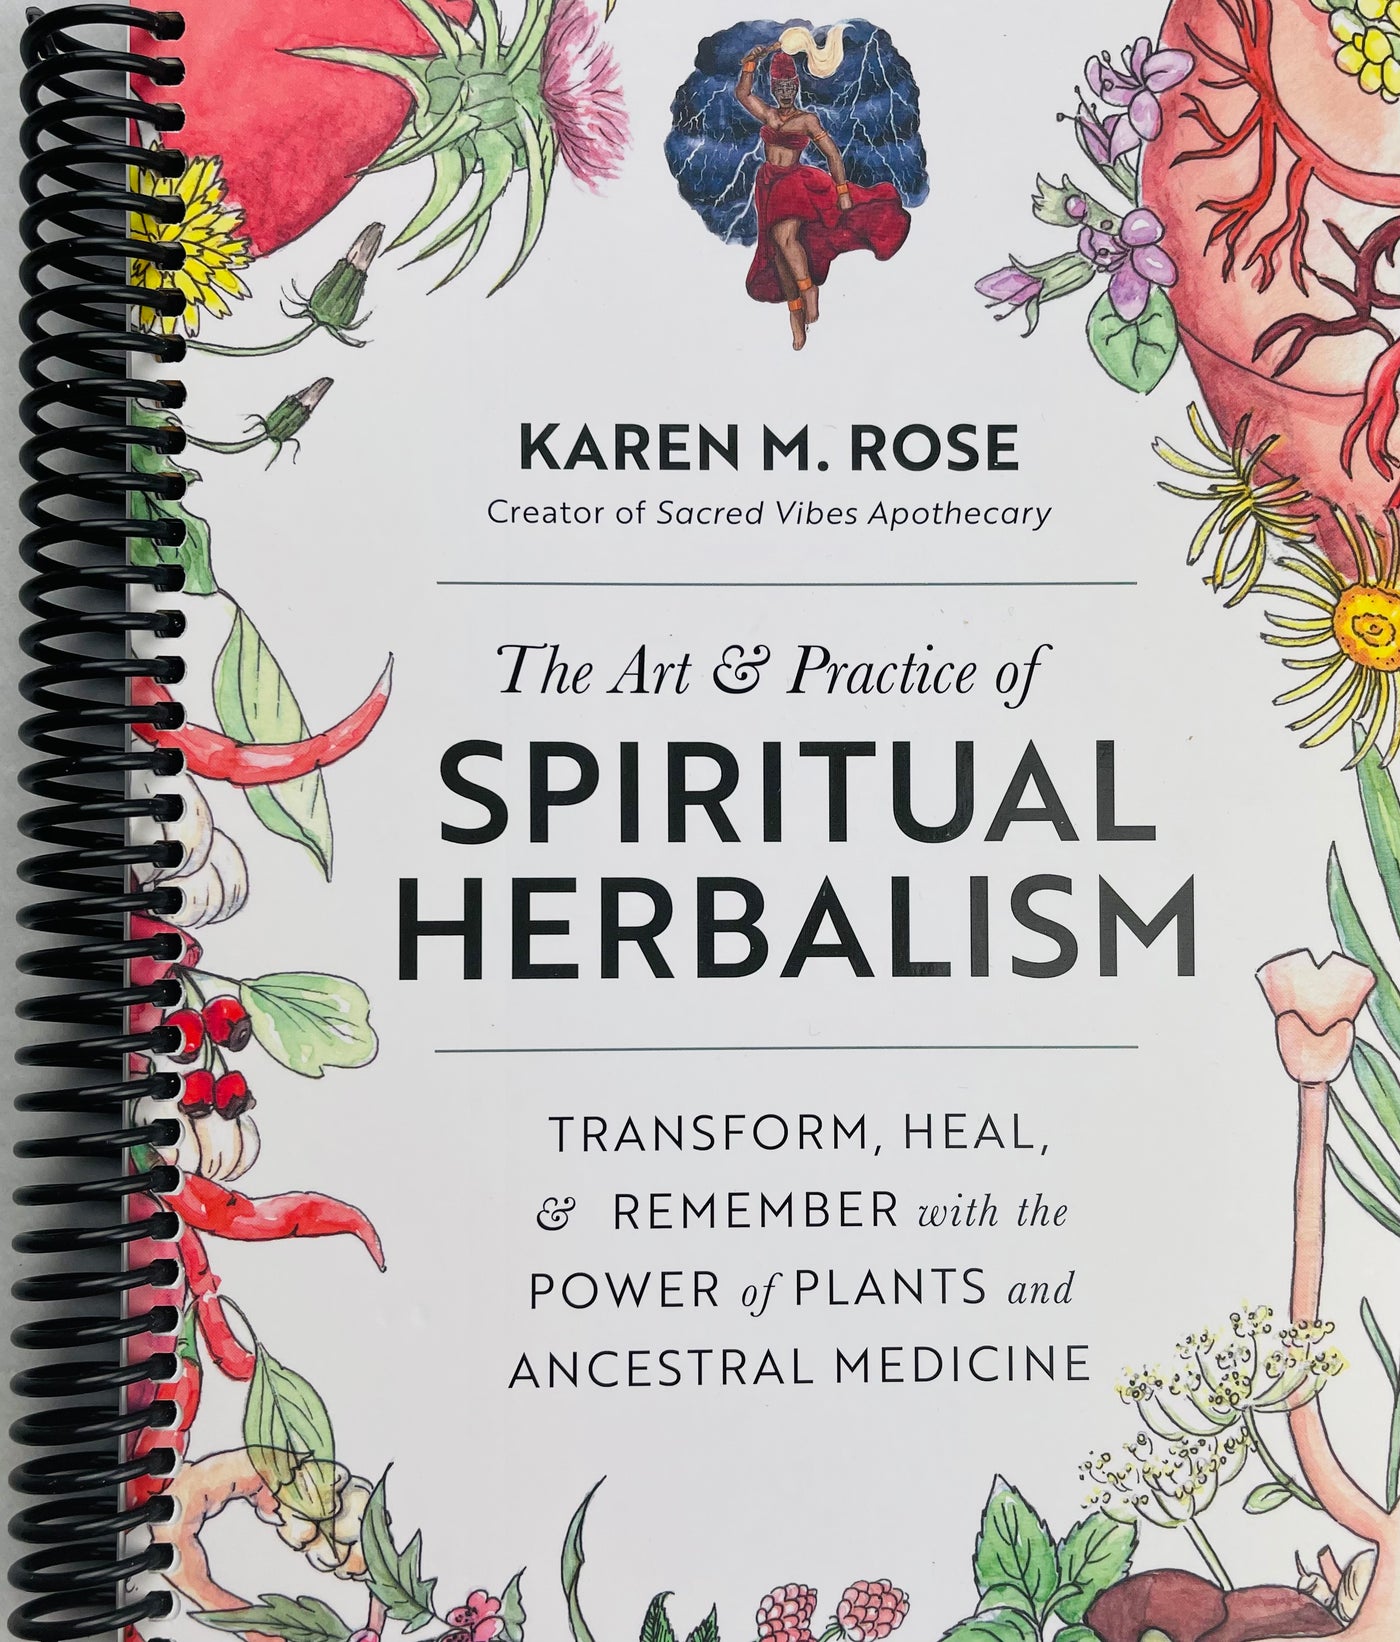 The Art & Practice of Spiritual Herbalism: Transform, Heal, and Remember with the Power of Plants and Ancestral Medicine (Spiral Bound)